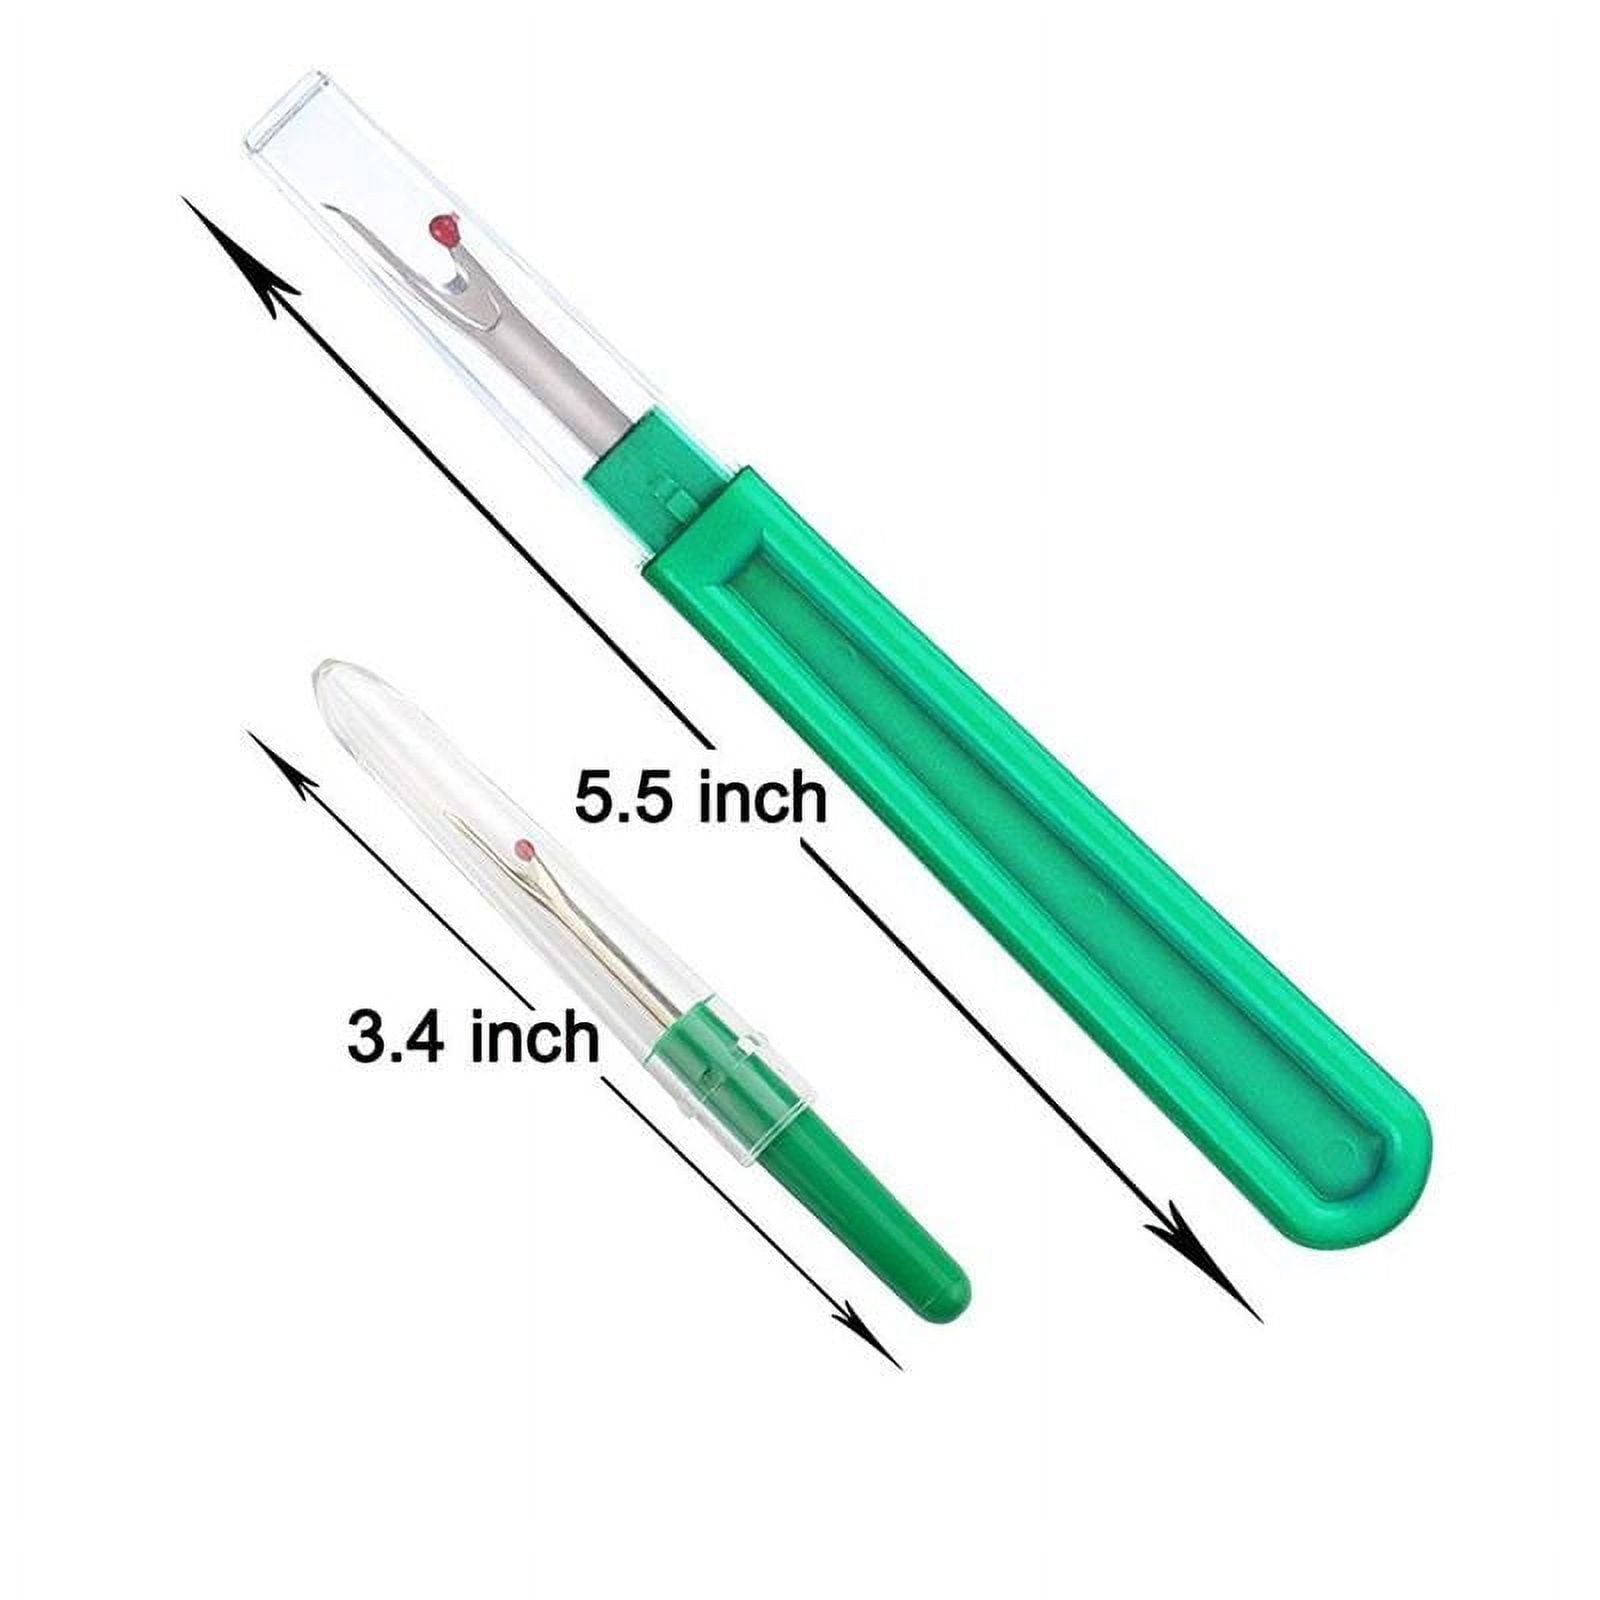  Jenbode Seam Sewing Ripper Set, Thread Remover Kit, Handy  Stitch Ripper Sewing Tool for Opening Seams,Hems (Multicolor 4)